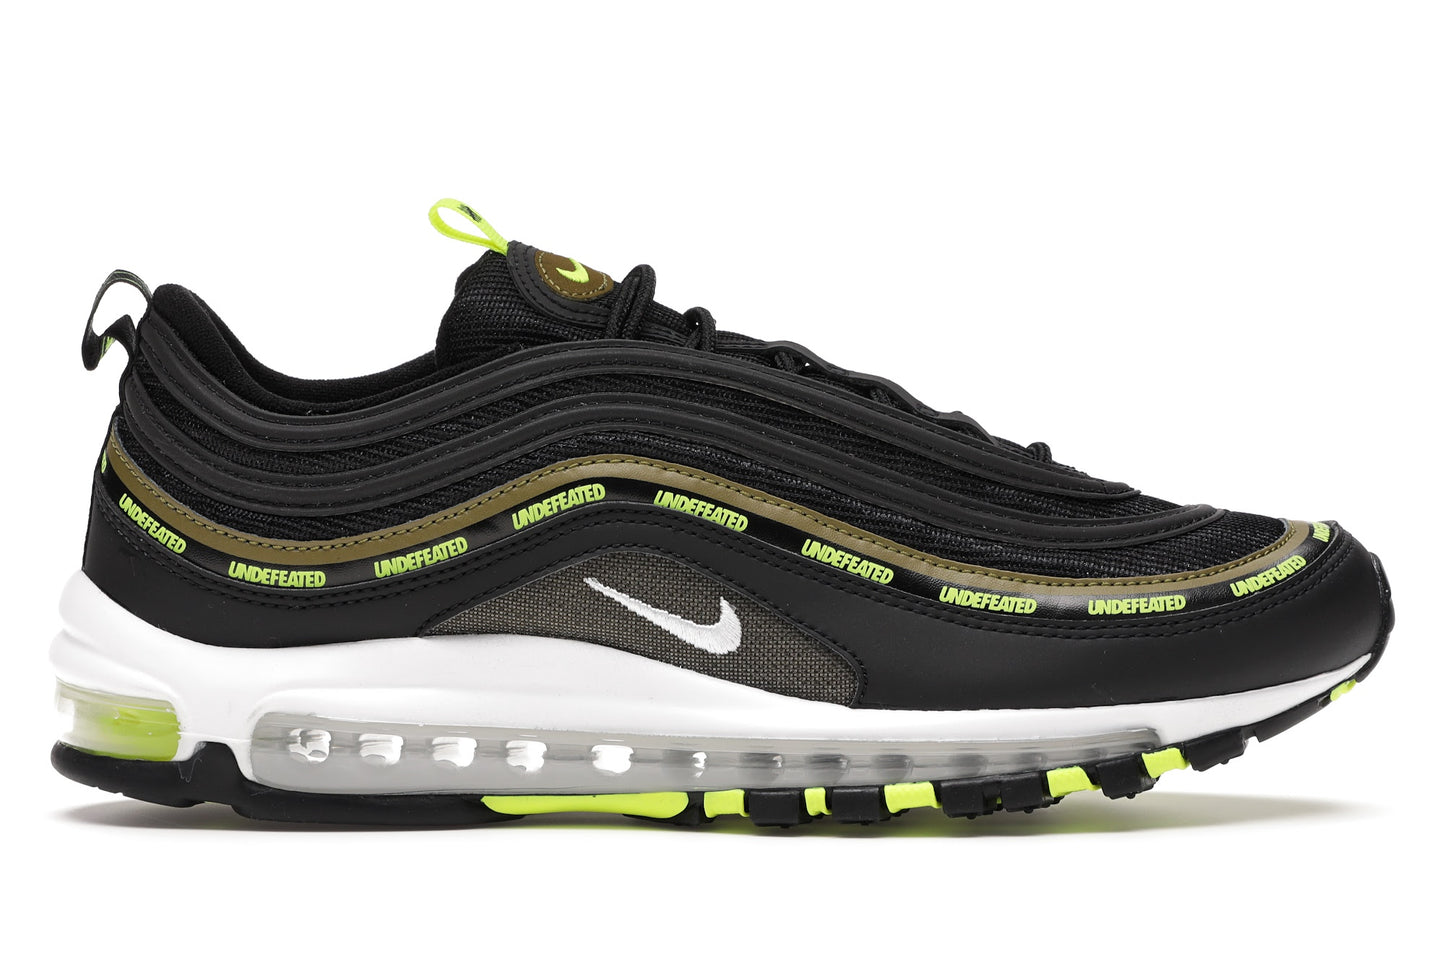 NIKE AIR MAX 97/UNDEFEATED "BLACK VOLT"